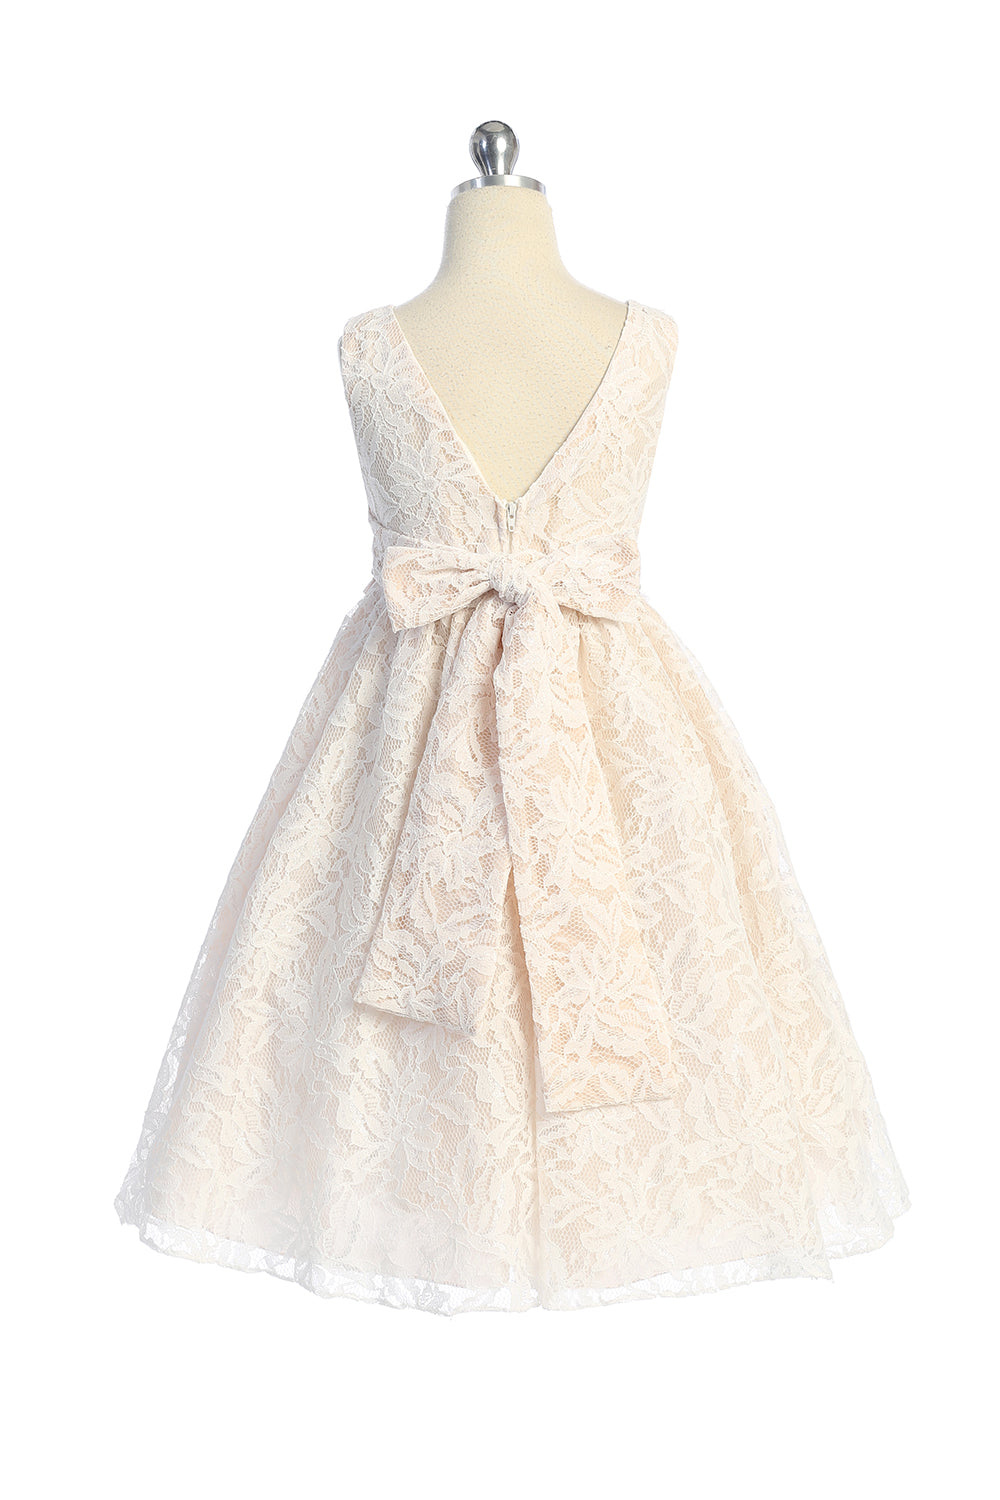 Lace V Back Bow Dress w/ Rhinestone Trim, Flower Girl Dress, Party Dress for Kids Get it now from Mommies Best Mall